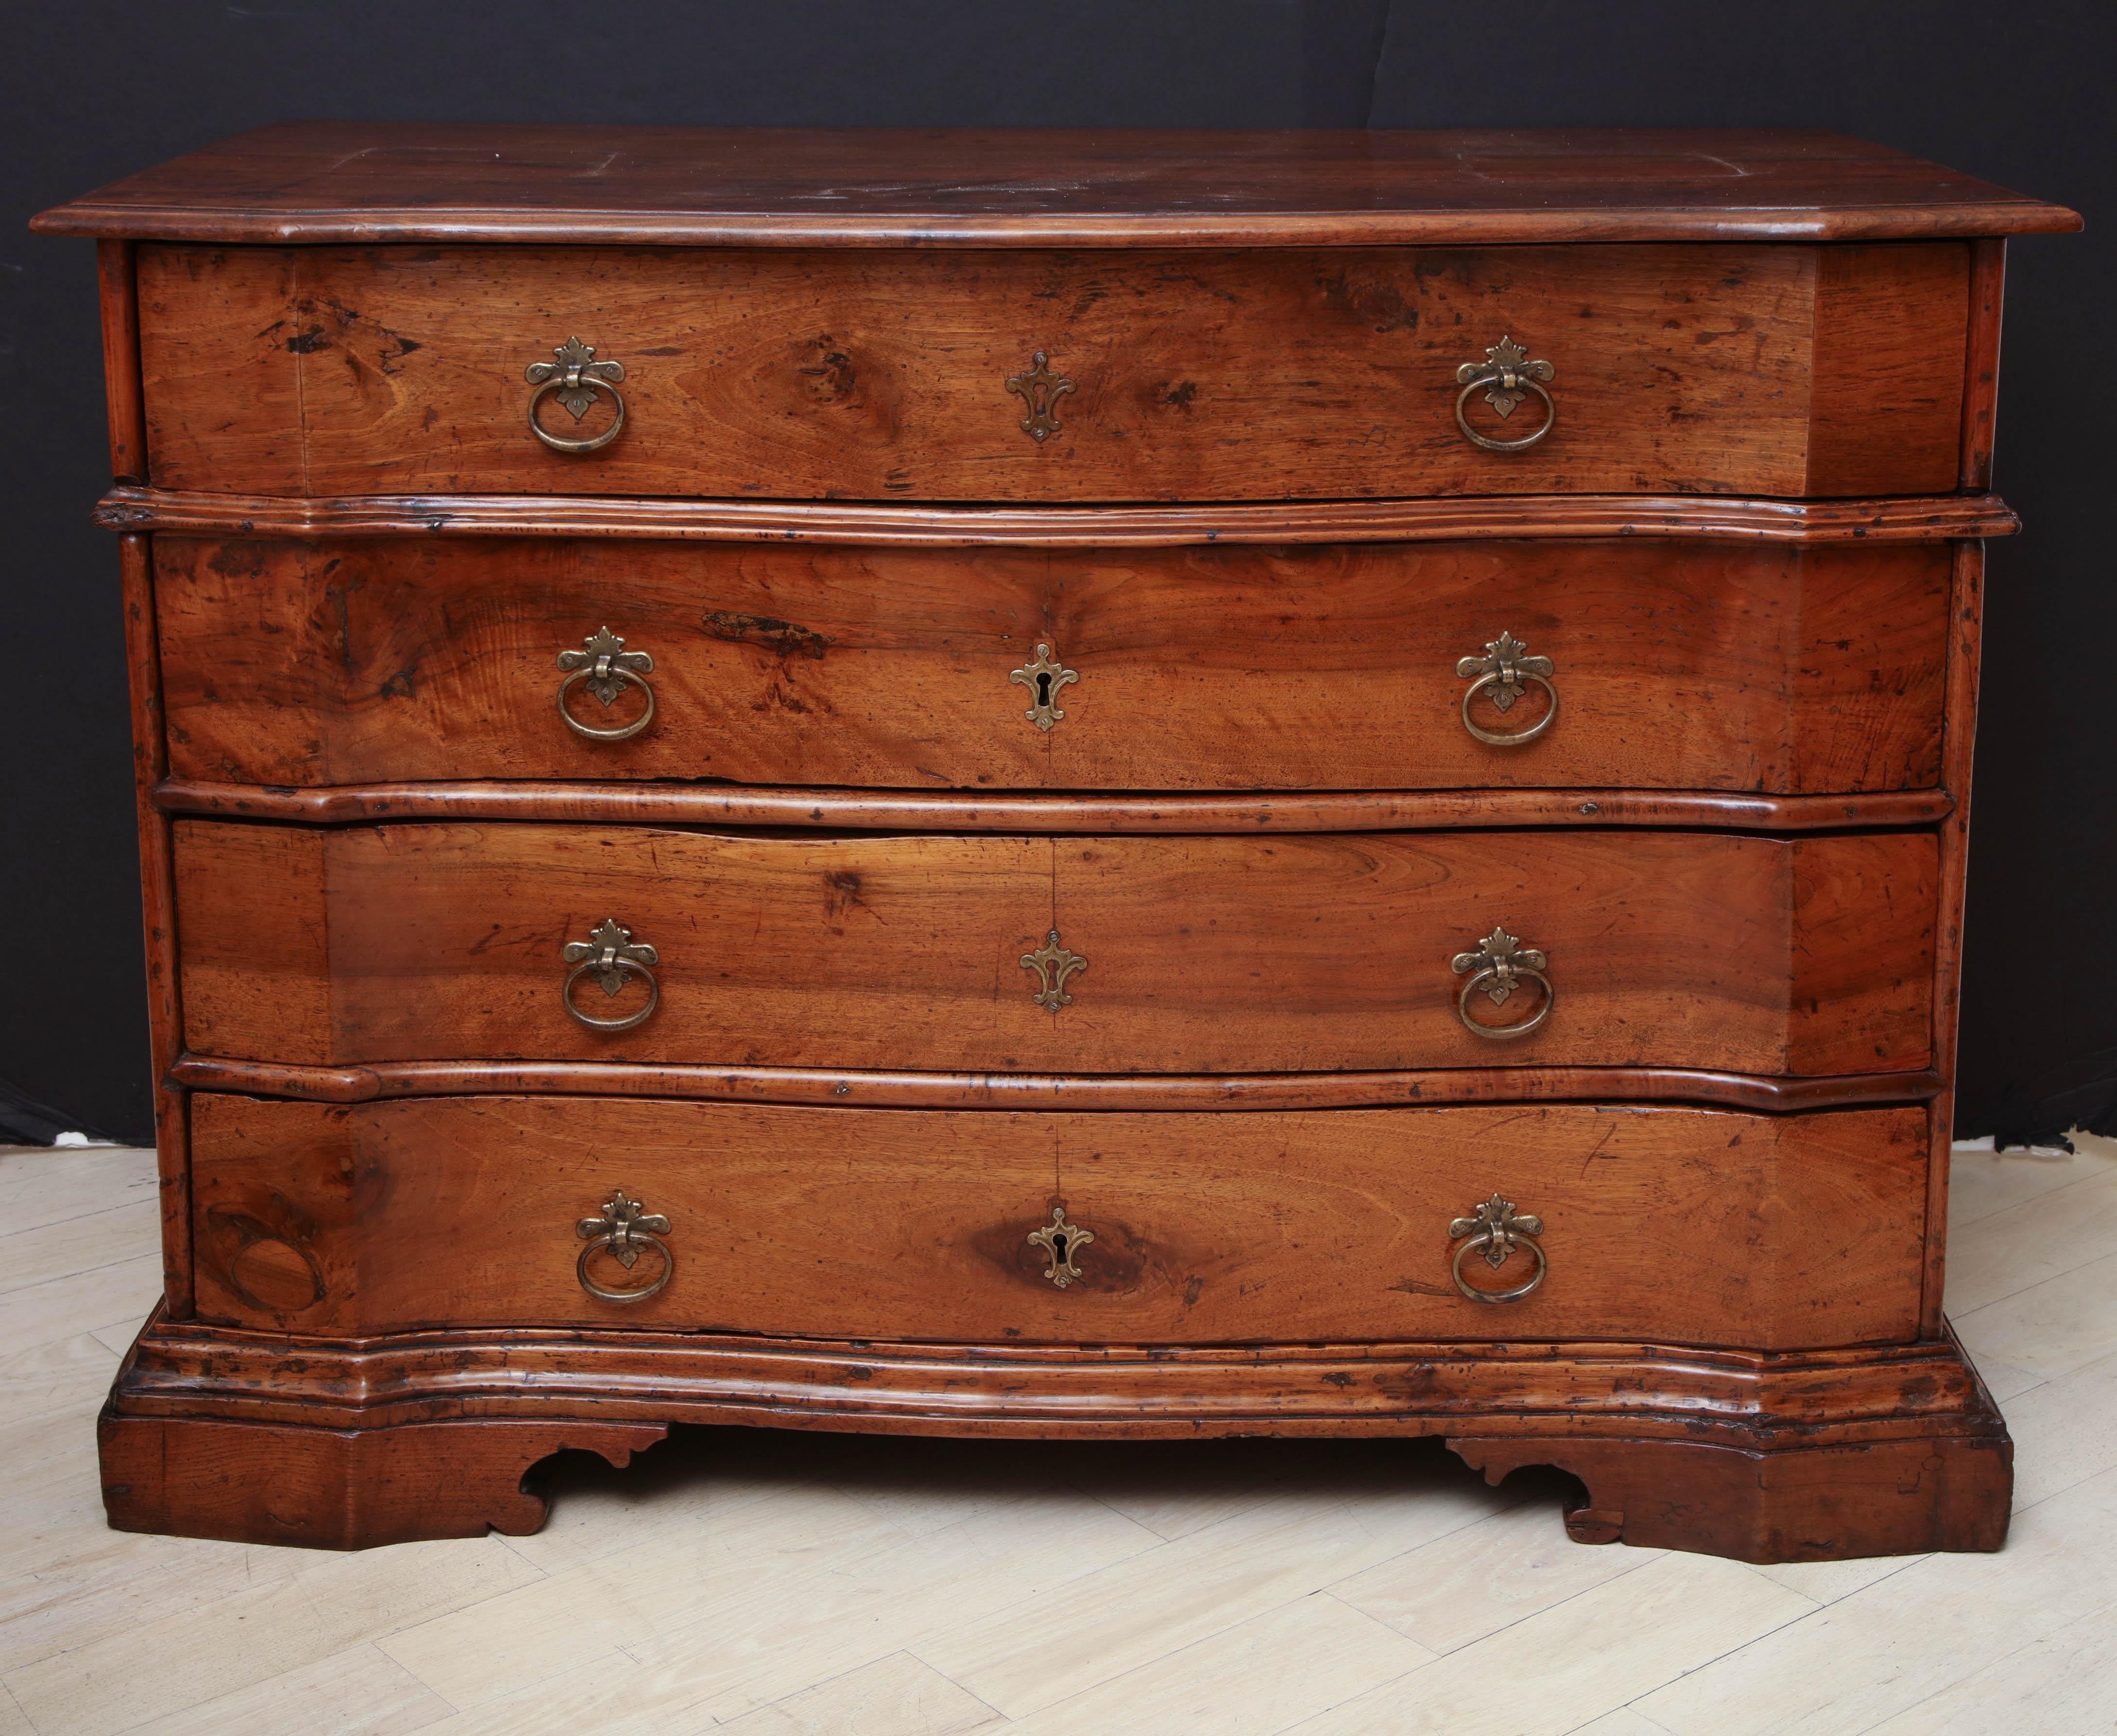 Beautiful 17th century Italian walnut commode with four drawers with shaped fronts and bracket feet.

Overall dimensions: 47.5” W 24” D 34” H


Available to see in our NYC Showroom 
BK Antiques
306 East 61st St. 2nd fl.
New York, NY 10065